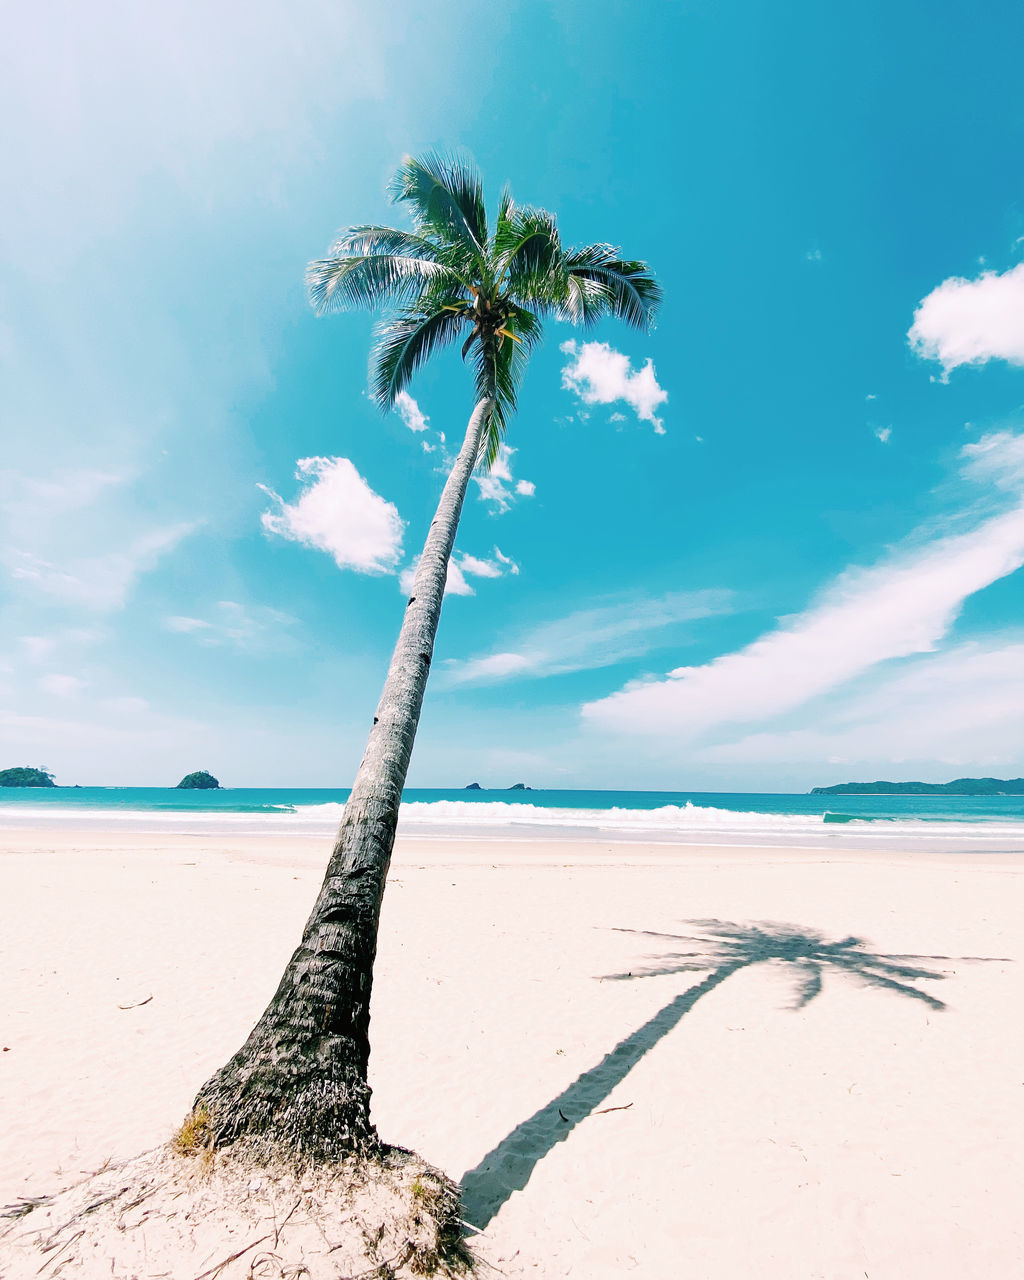 land, palm tree, tropical climate, sky, nature, beach, tree, water, sand, sea, beauty in nature, cloud, plant, scenics - nature, ocean, shore, environment, coconut palm tree, tranquility, travel destinations, blue, landscape, coast, tropical tree, tranquil scene, no people, travel, body of water, outdoors, holiday, wind, vacation, tree trunk, trip, island, trunk, day, idyllic, sunlight, horizon, tourism, summer